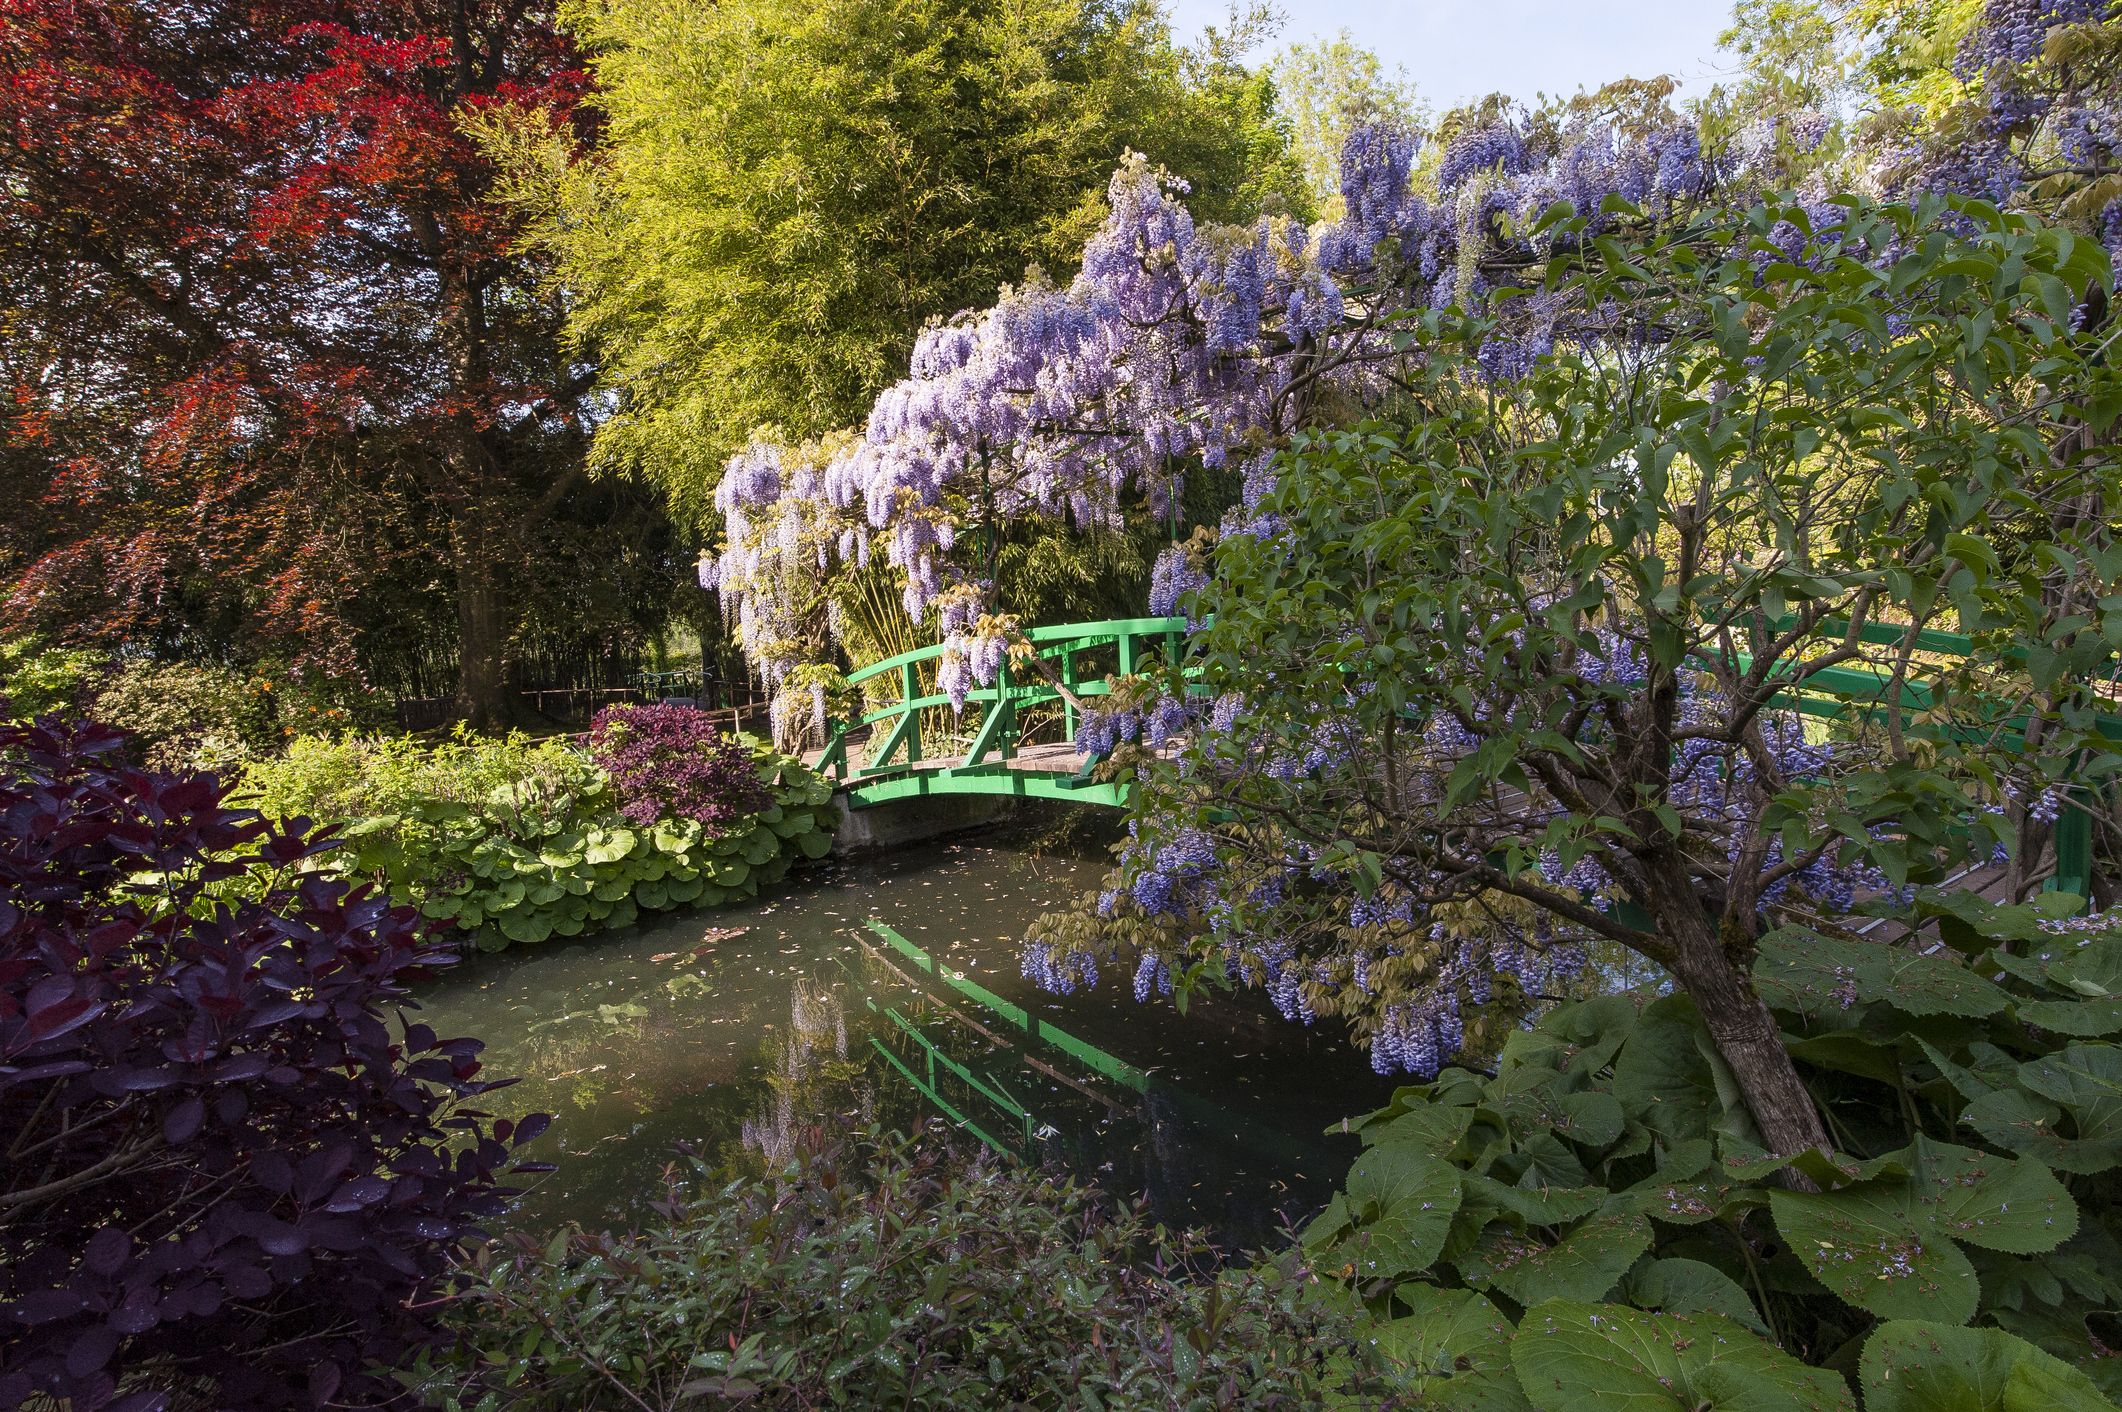 <p>Love exploring beautiful gardens? We've rounded up the best green-fingered garden holidays and tours, from <a href="https://www.goodhousekeeping.com/uk/lifestyle/travel/g40482436/best-hotels-kent/">Kent</a> to <a href="https://www.goodhousekeeping.com/uk/lifestyle/travel/g37065833/madeira-hotels/">Madeira</a>. </p><p>On these wonderful garden tours around the world, you can soak up the subtropical gardens of the Isles of Scilly and explore the dazzling <a href="https://www.goodhousekeeping.com/uk/lifestyle/travel/a39699260/madeira-flower-festival/">Madeira Flower Festival</a> with a gardening expert.</p><p> Whether you're after a <a href="https://www.goodhousekeeping.com/uk/lifestyle/travel/g36287200/spring-holidays/">spring holiday</a> with gorgeous gardens in bloom or a late summer getaway to explore glorious gardens after the crowds have gone home, we've got you covered with our selection of incredible horticultural escapes.</p><p>Luckily, you don't need to know your hyacinths from your hydrangeas to enjoy one of Good Housekeeping's garden holidays. Enjoy the acres of rainbow-coloured tulips as you cruise through Holland's canals to Keukenhof Gardens or wander around the Grade I gardens designed by Vita Sackville-West at Sissinghurst Castle in Kent. Our hand-crafted itineraries bring together some of the finest horticultural displays in Europe. Add in the guided tours and Q&As from experts such as Sarah Raven and <em>Gardeners' World</em> presenter Adam Frost and you'll return home with increased knowledge and appreciation of all things green. Check out our best garden holidays in the UK and Europe for 2024.</p>